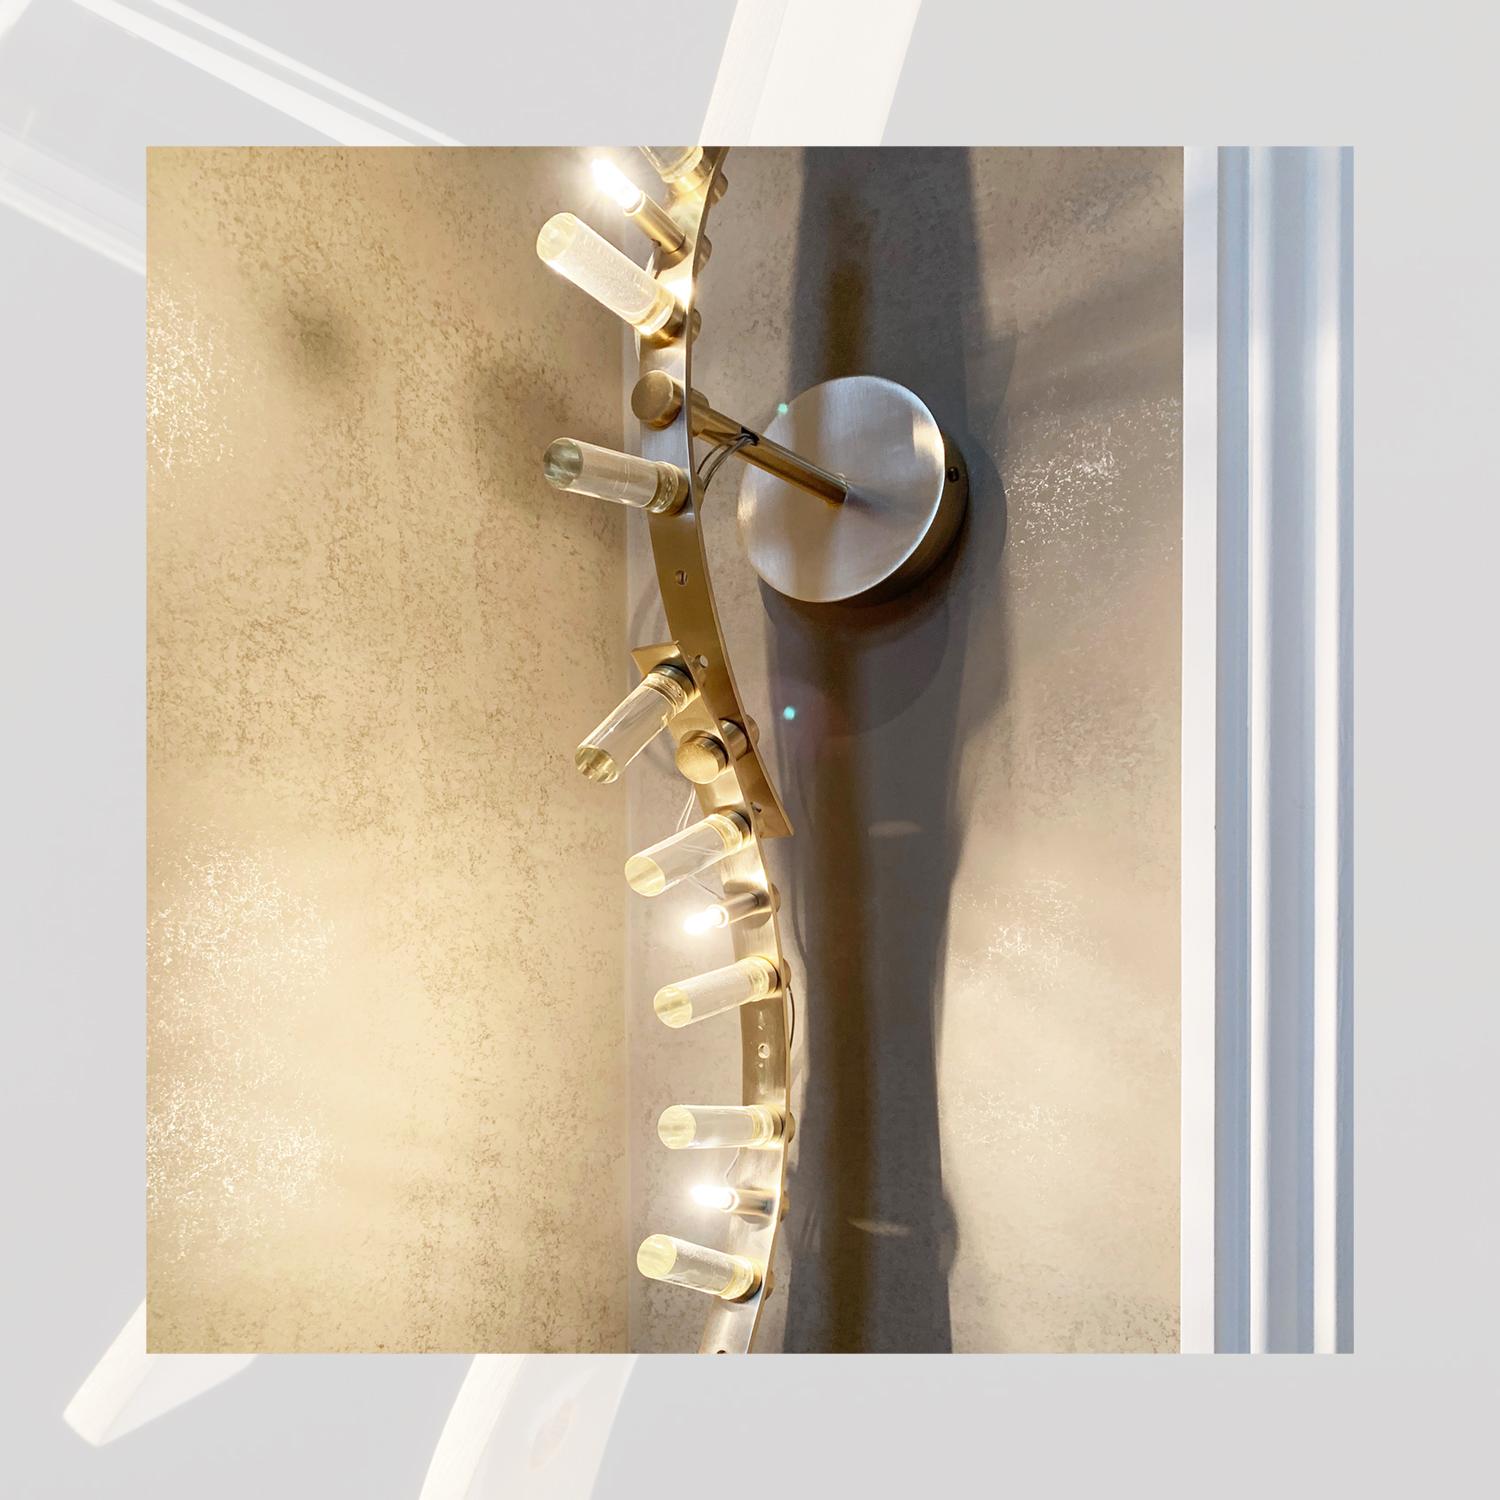 Baroncelli, Italy - Set of 7 gold and glass wall lights.

Illuminate your room with the elegant and artistic 'Flexus Fosco' wall lights by Baroncelli, Italy.

Bring a touch of contemporary glamour to your home with the stunning 'Flexus Fosco' wall